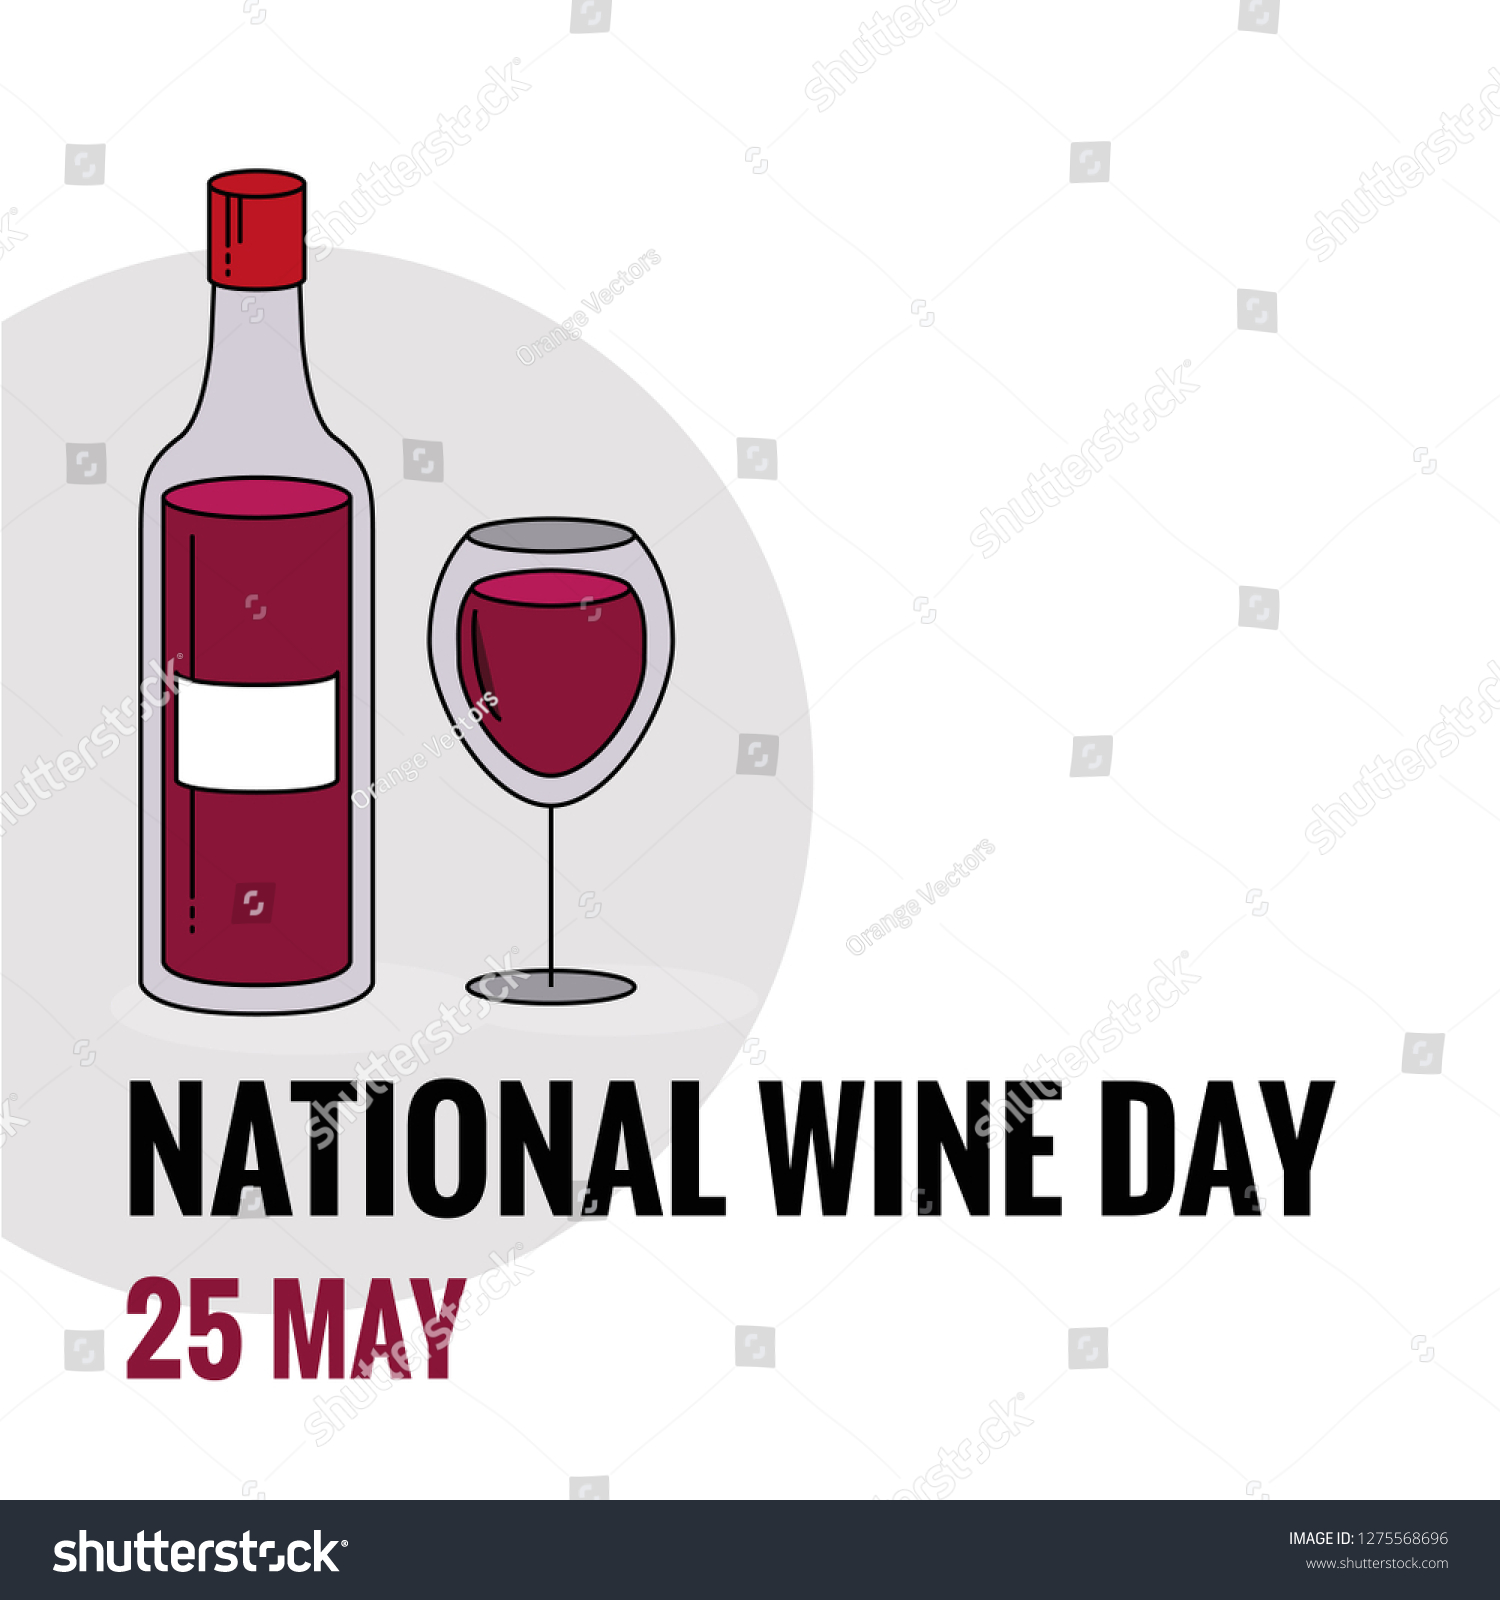 National Wine Day 25 May Stock Vector Royalty Free 1275568696 Shutterstock 8388